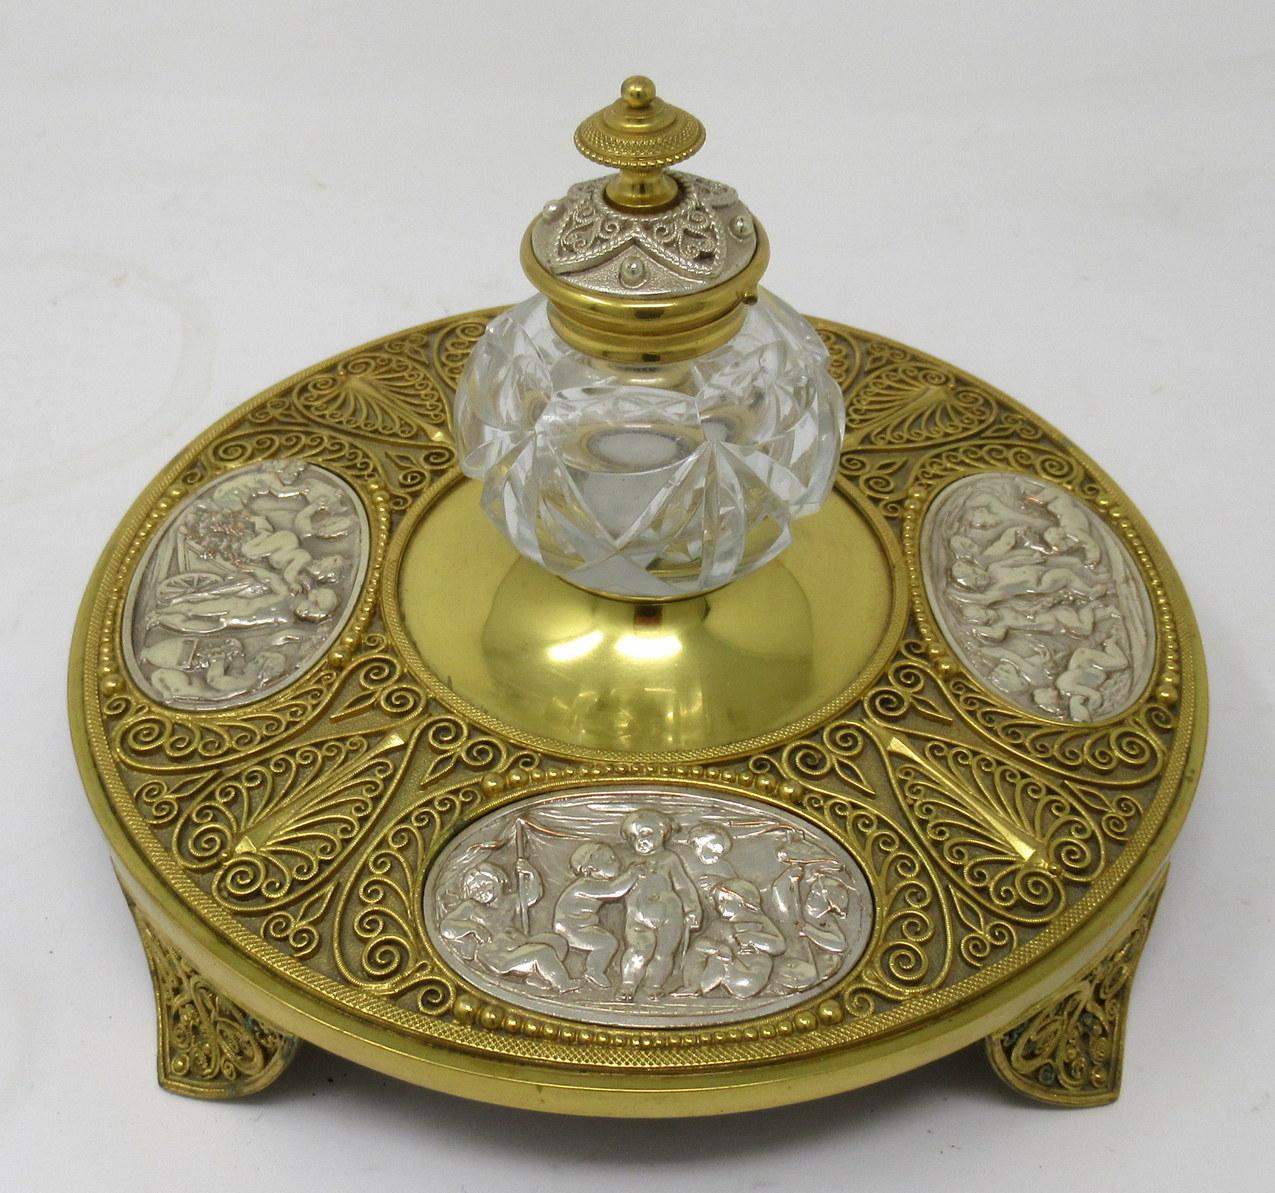 Stunning French “Grand Tour” Filigree mounted ormolu & silver-plated bronze desk inkwell Encrier of exhibition quality, early Nineteenth Century, possibly Regency period. Complete with its original heavy gauge hand cut crystal ink jar and decorative